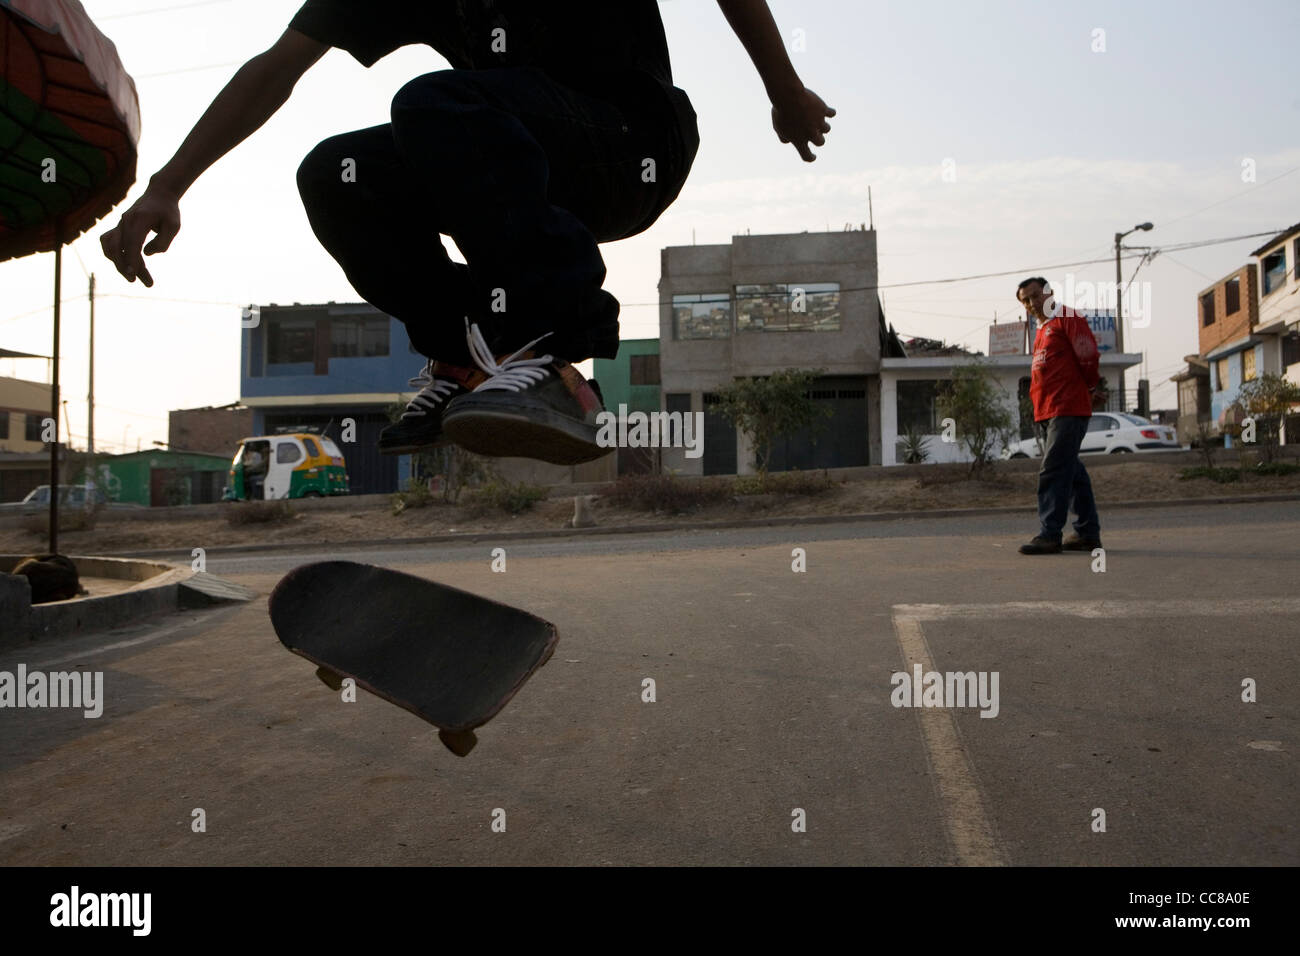 A skateboarder practices in the streets of Lima, Peru, South America. Stock Photo